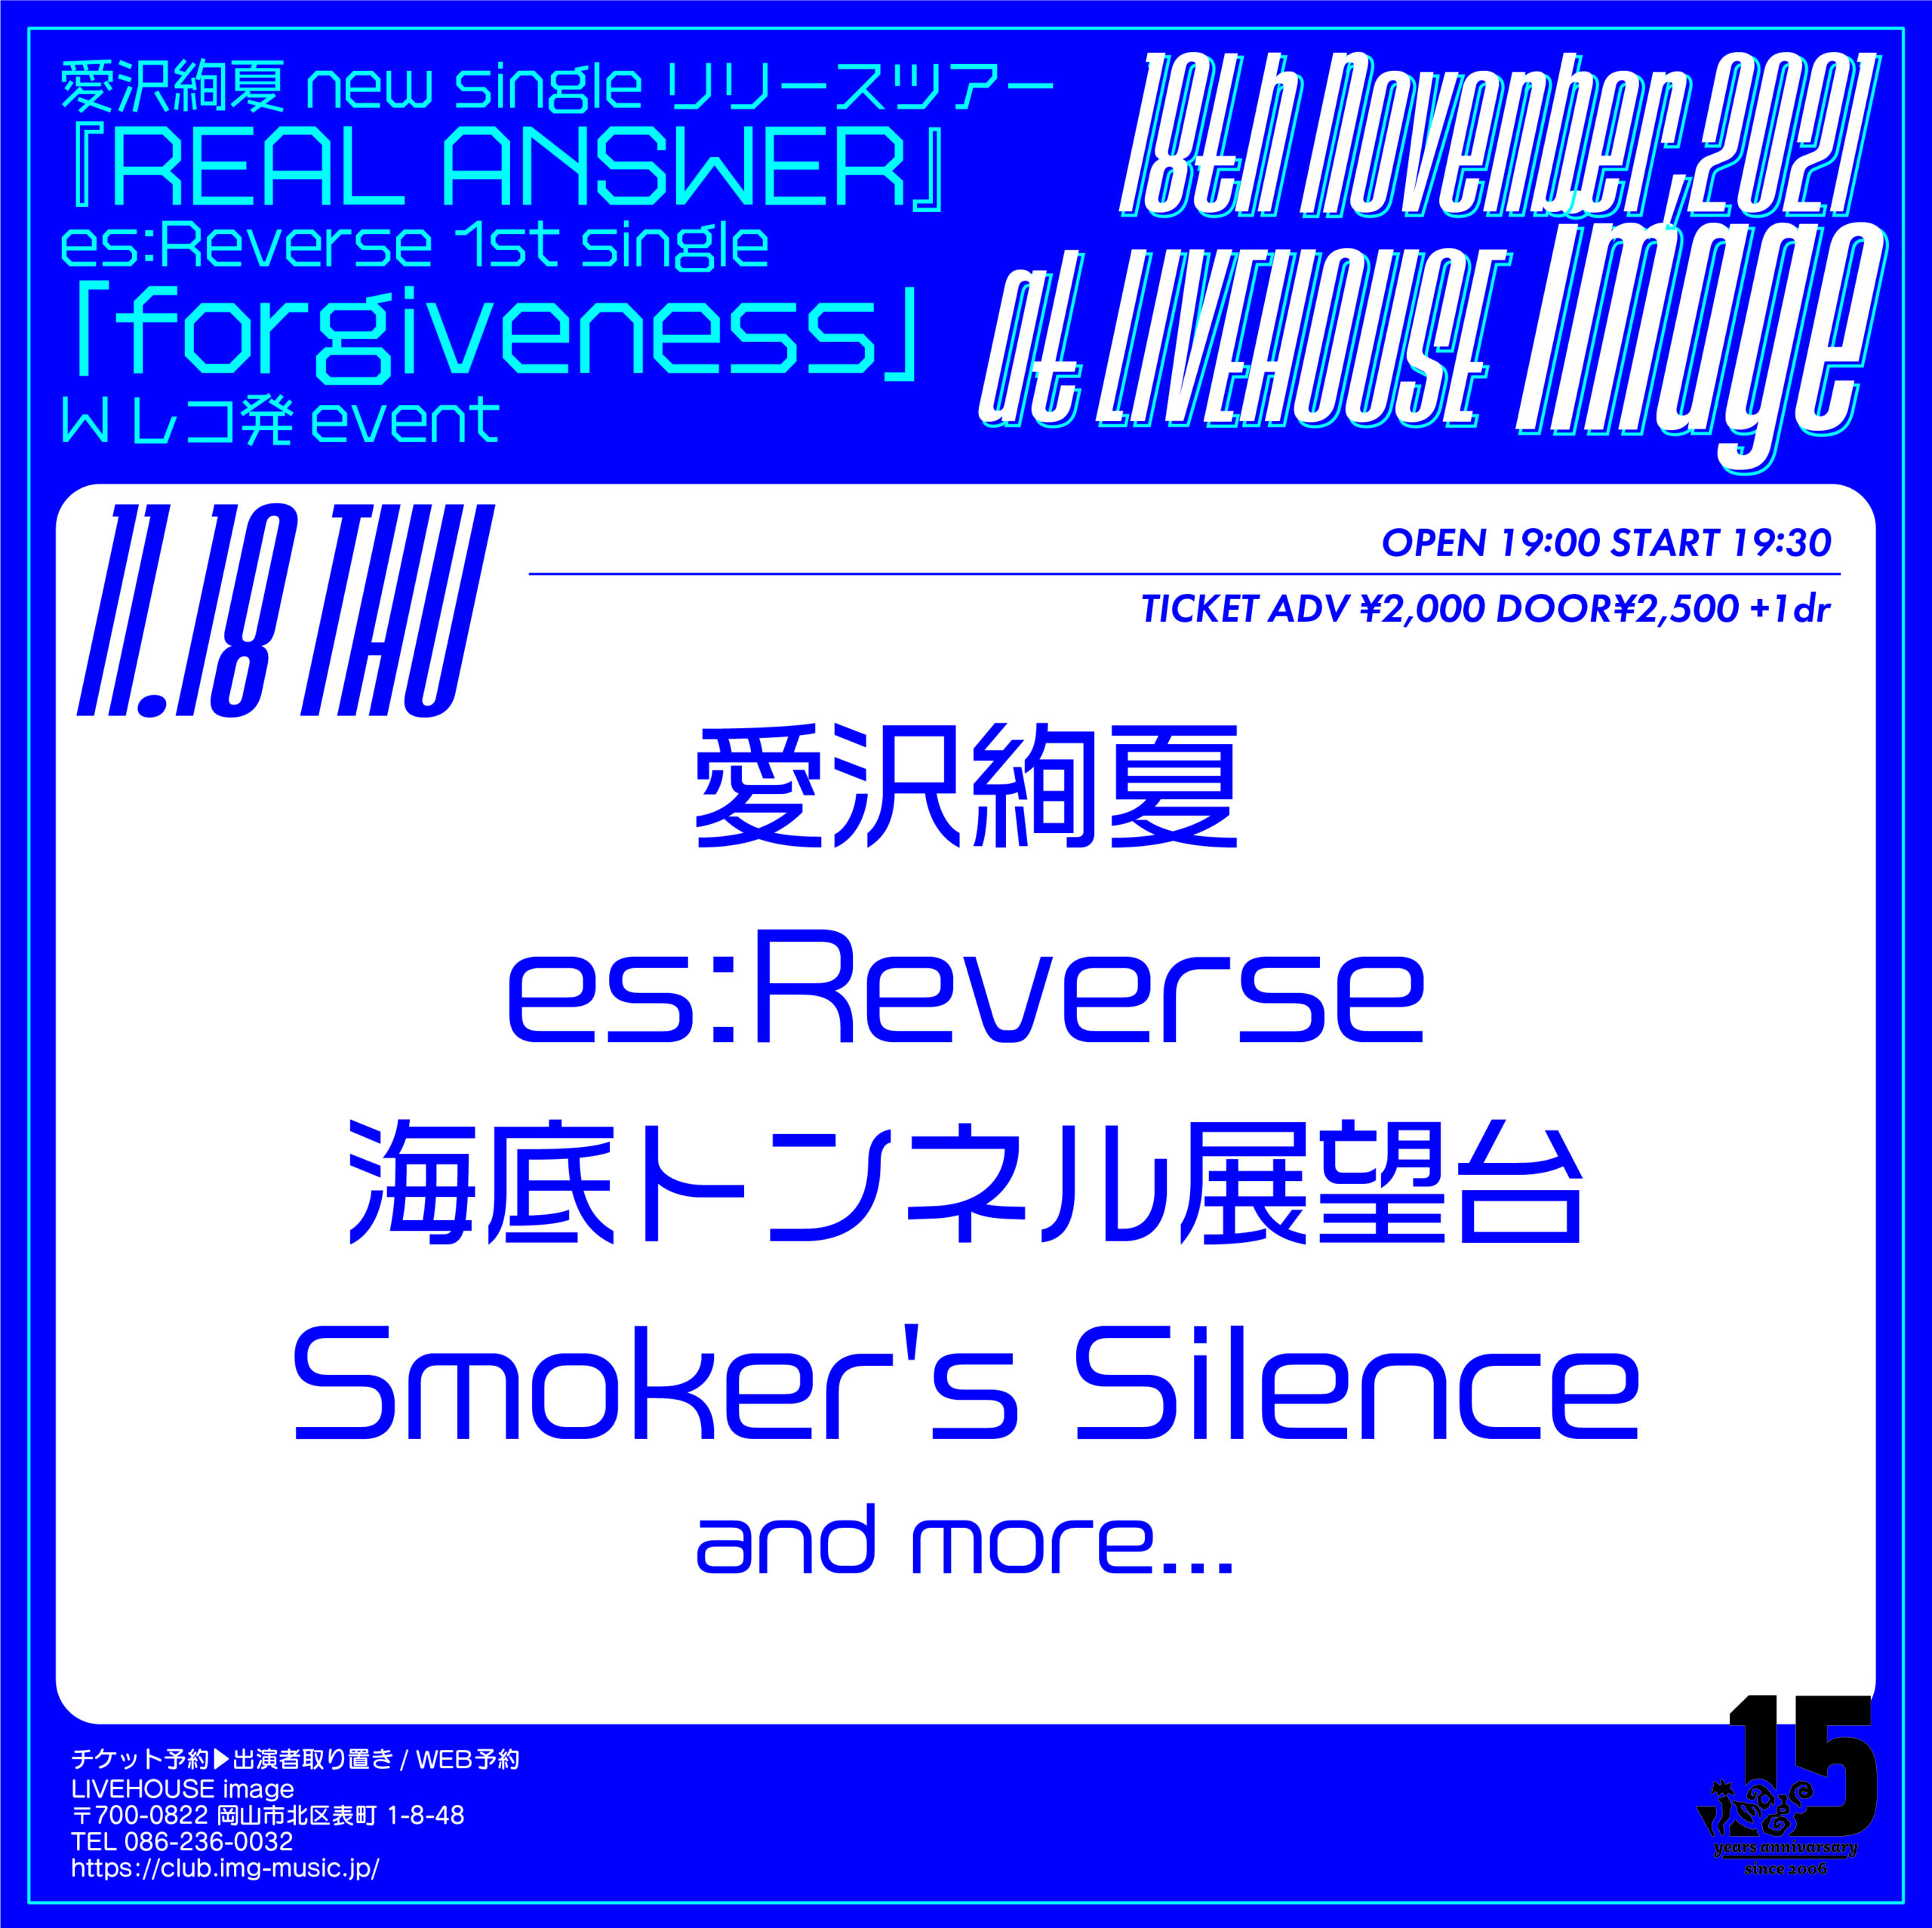 image 15th Anniversary LIVE youth / 愛沢絢夏 new single リリースツアー『REAL ANSWER』/ es:Reverse 1st single 「forgiveness」Wレコ発event.